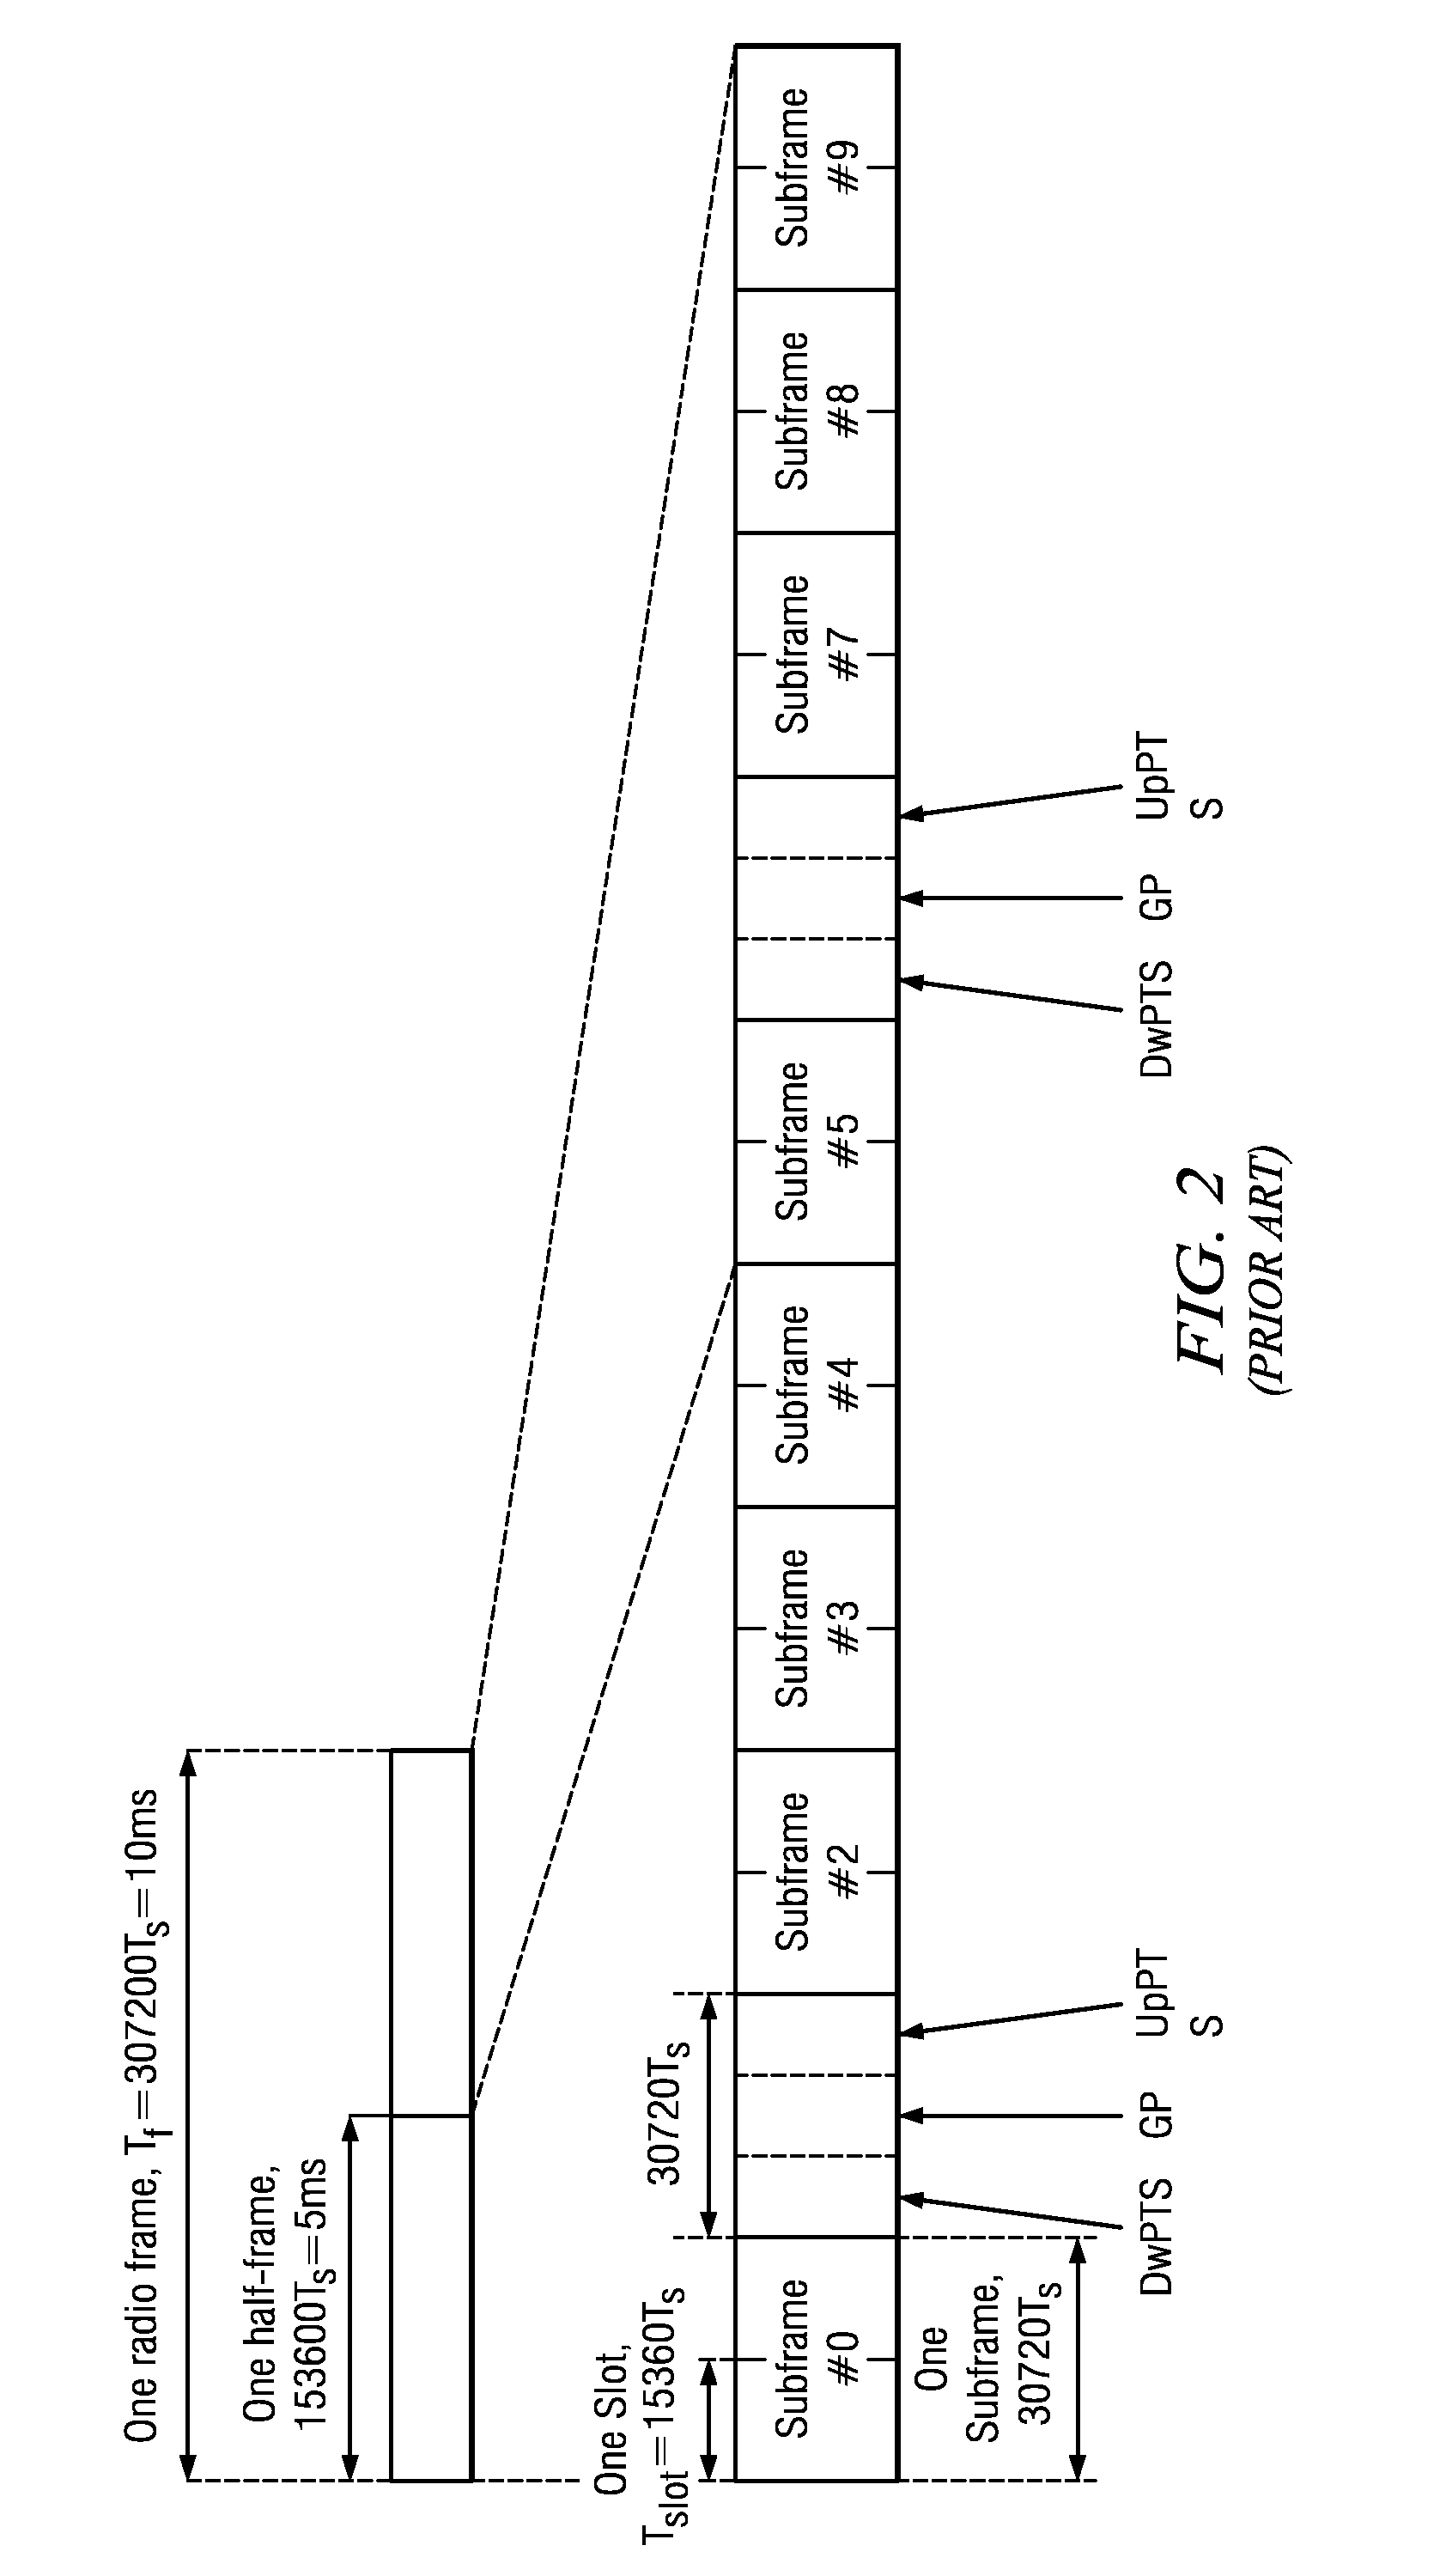 Channel feedback for coordinated multi-point transmissions